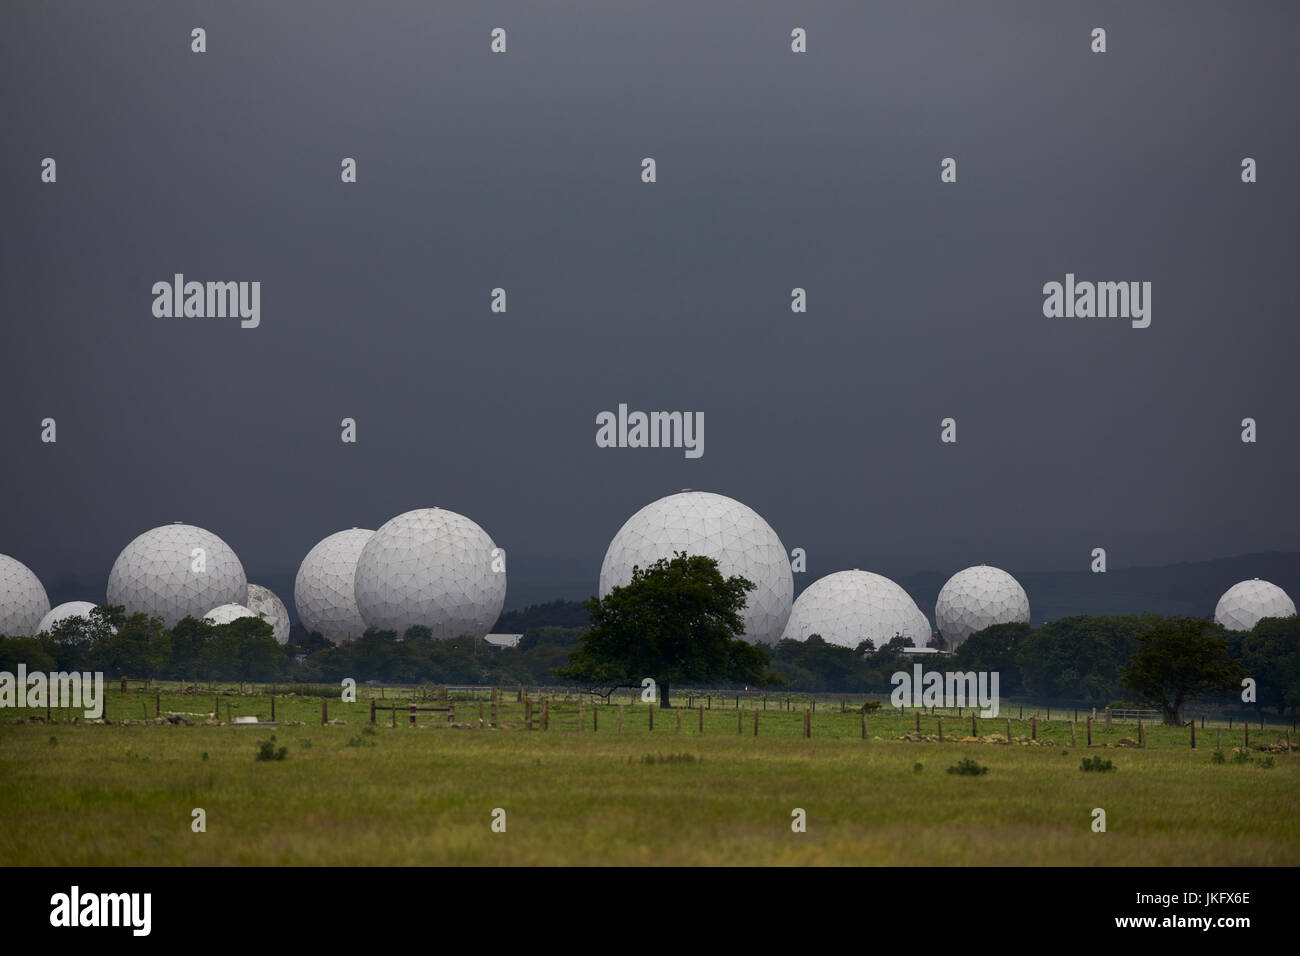 Royal Air Force Menwith Hill station near Harrogate, North Yorkshire, England, largest electronic monitoring station in the world, Radomes visible ove Stock Photo